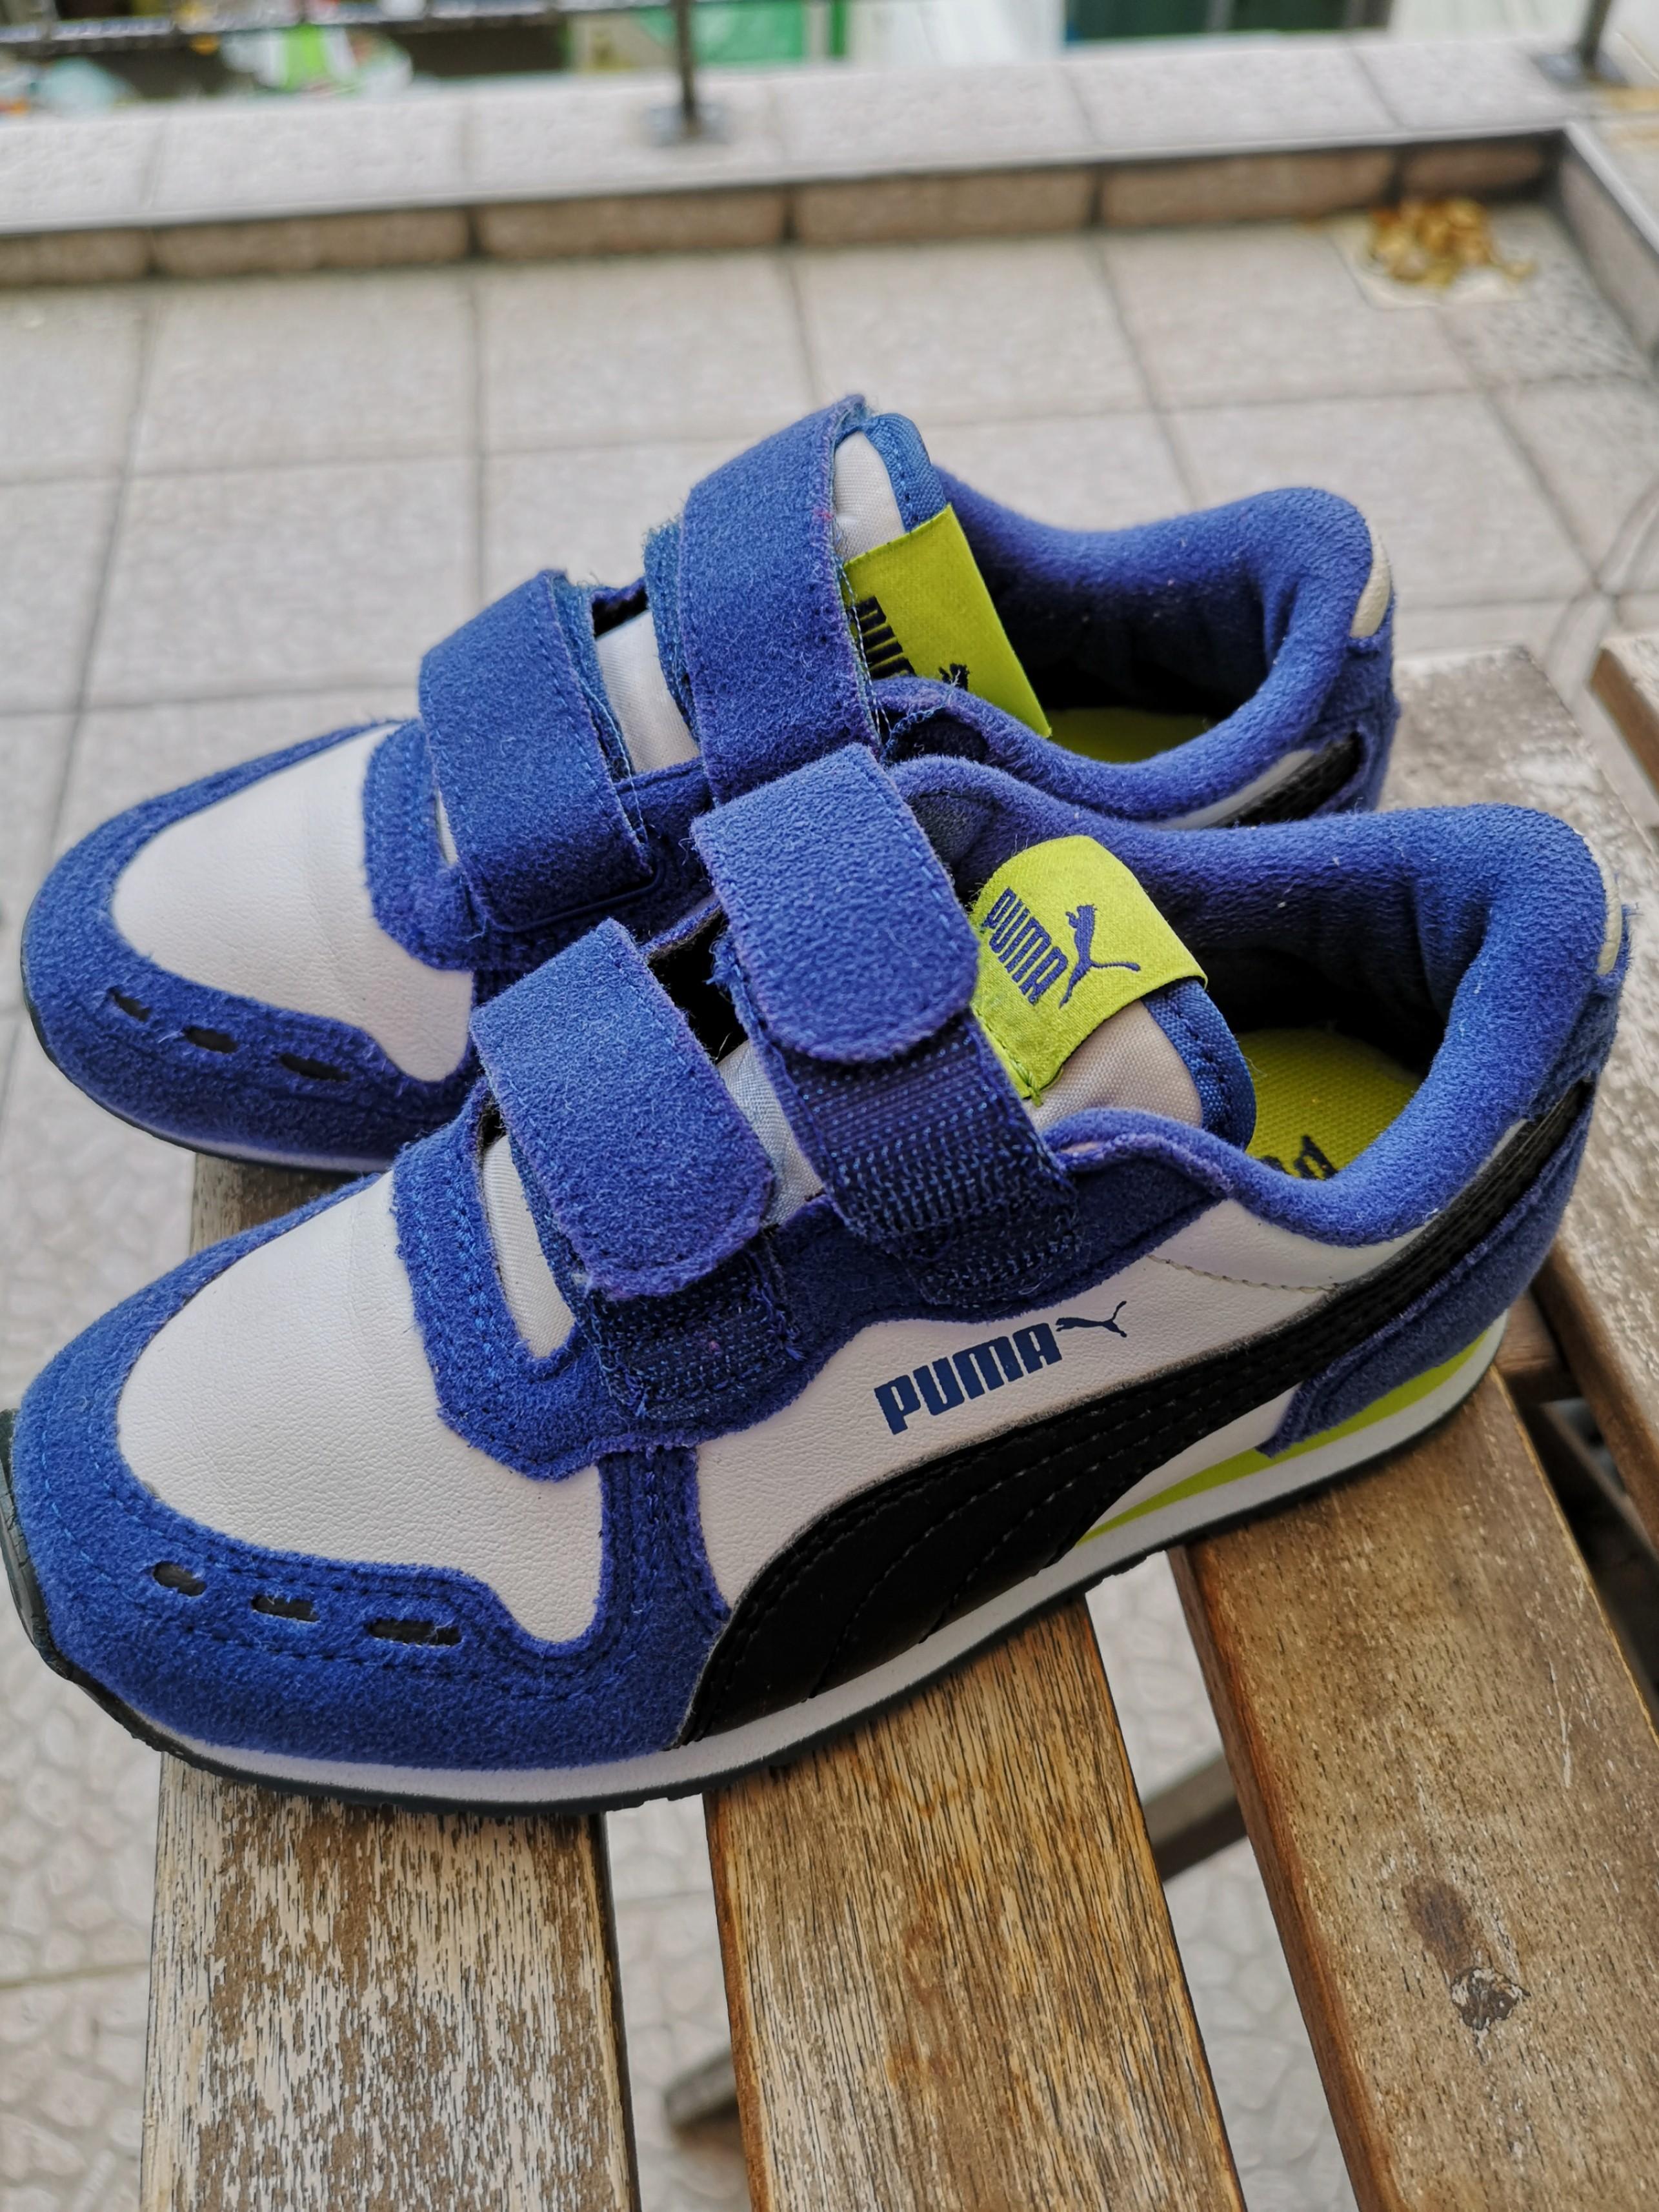 PUMA Boy shoes (3-4 years old), Babies 